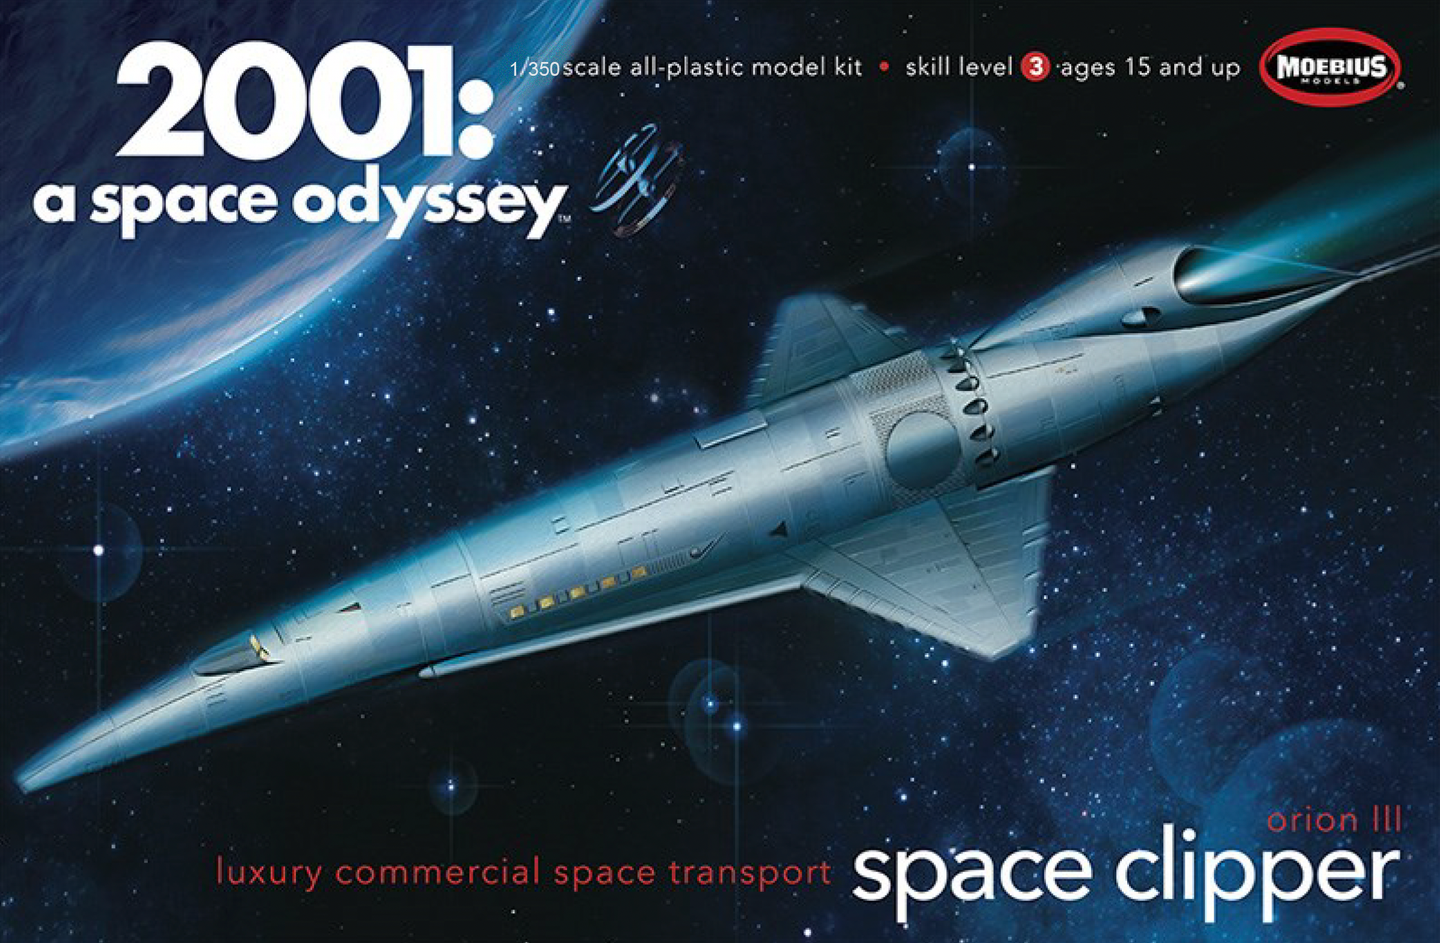 Moebius 2001: A Space Odyssey 1/350 Orion III Space Clipper MOE2001-12